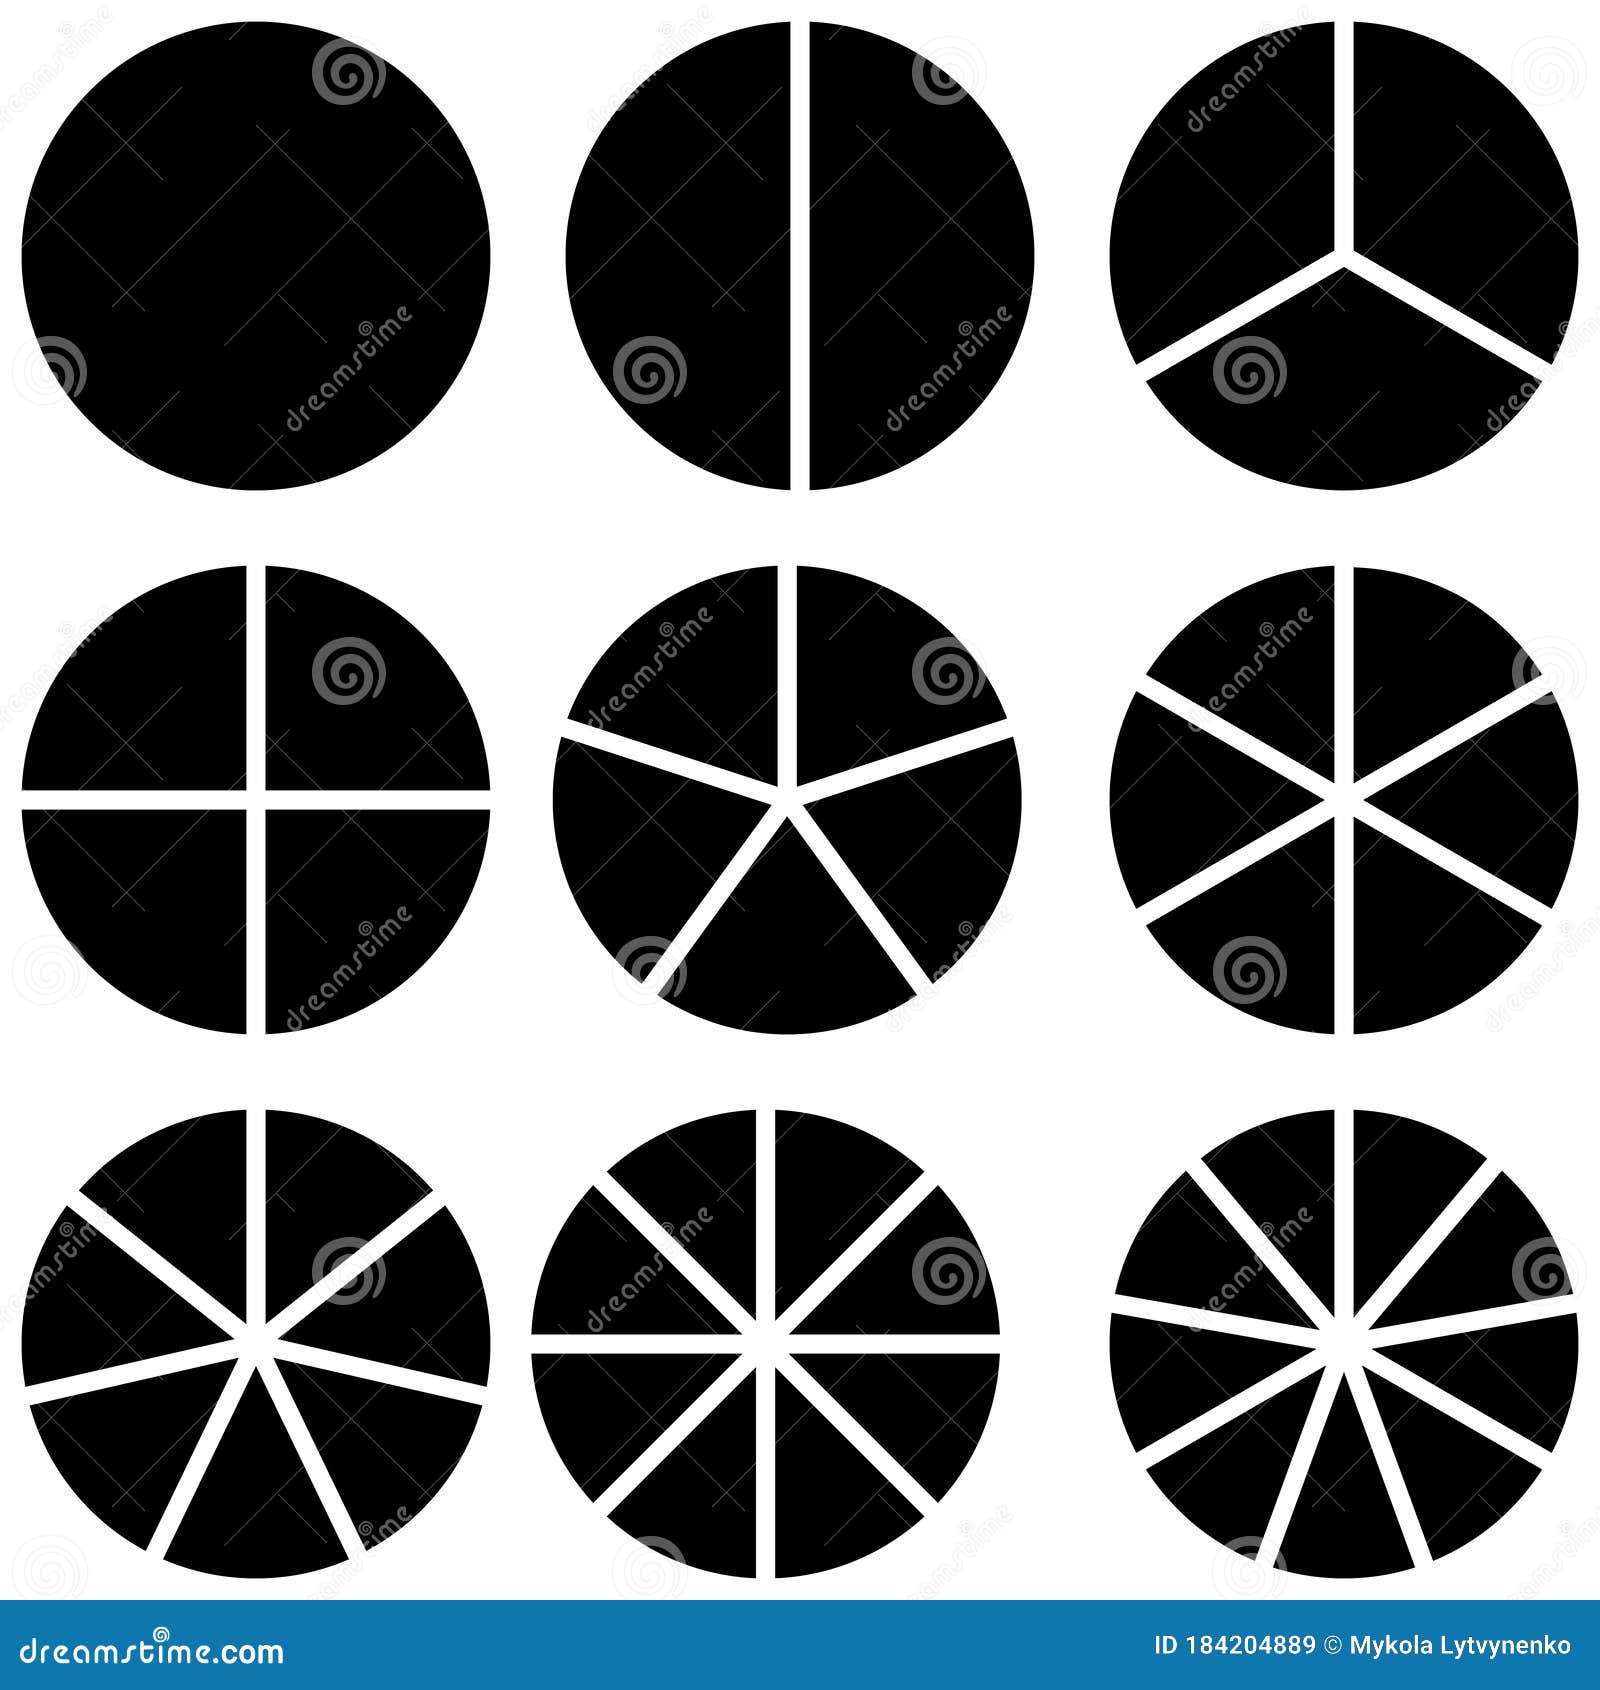 set infographic icons circles divided by radius into sectors,  of the circle sector for visualization of